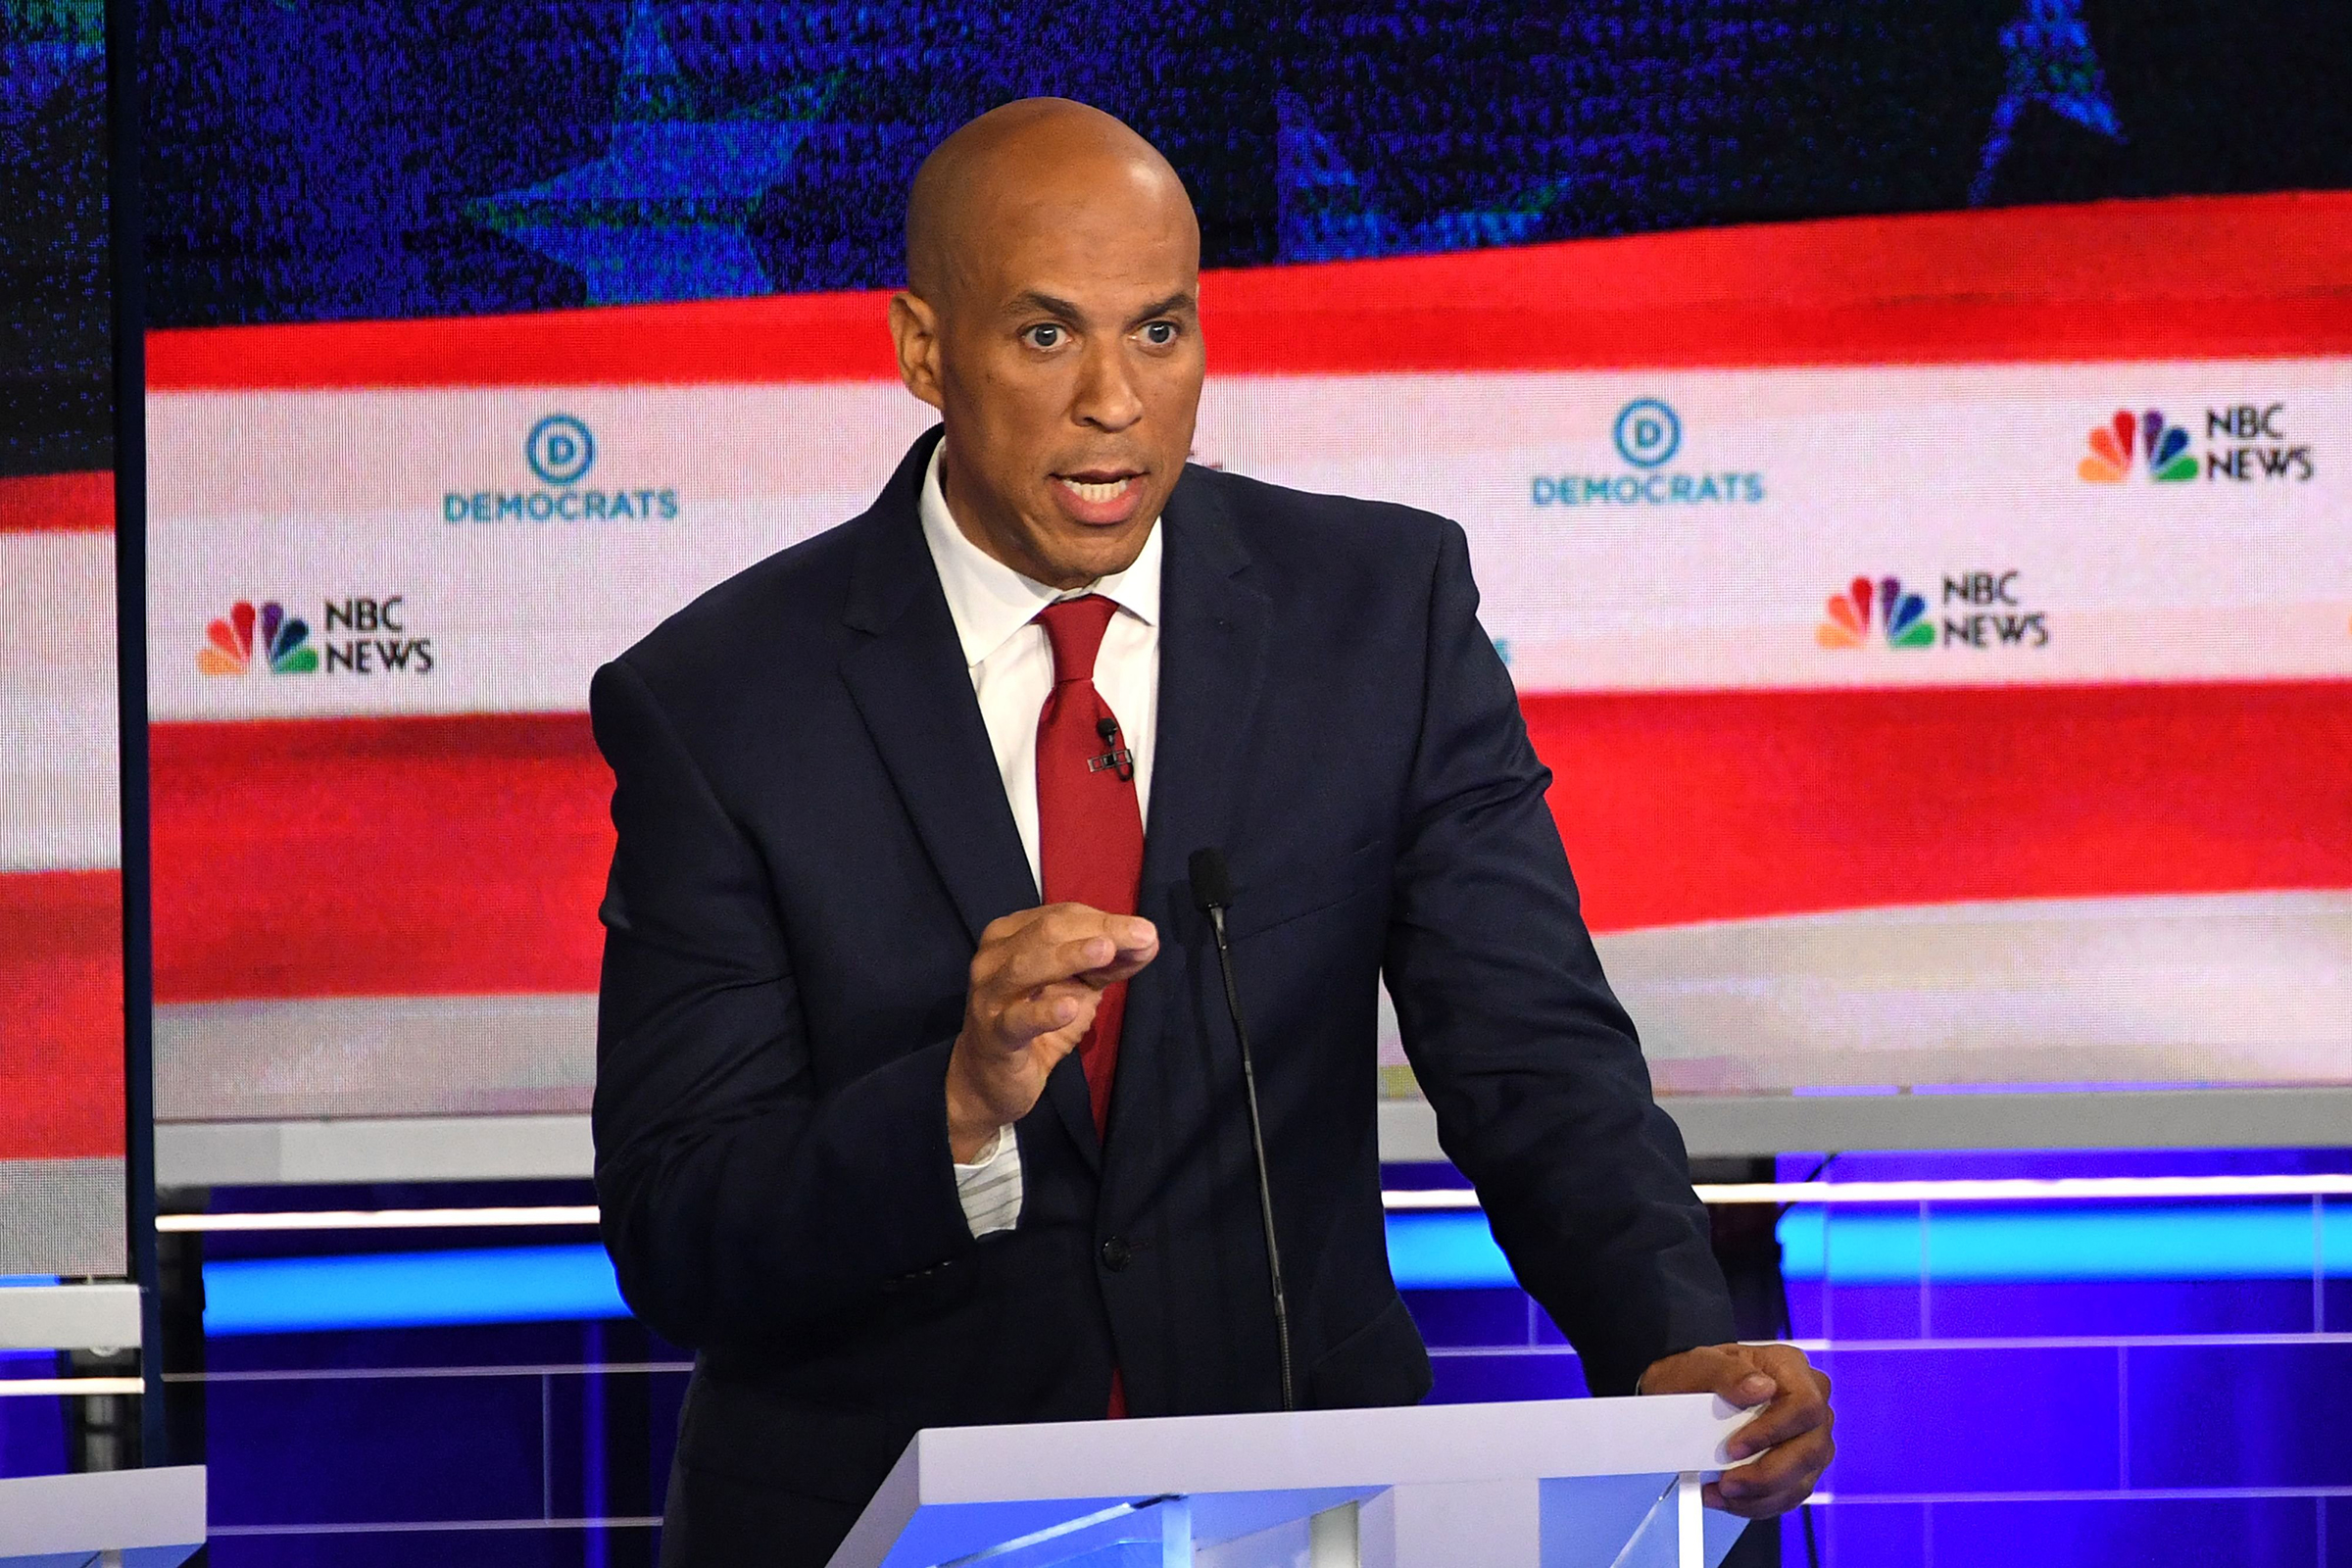 Democratic presidential hopeful US Senator from New Jersey Cory Booker participates in the first Democratic primary debate of the 2020 presidential campaign season hosted by NBC News at the Adrienne Arsht Center for the Performing Arts in Miami, Florida, June 26, 2019. (Jim Watson—AFP/Getty Images)